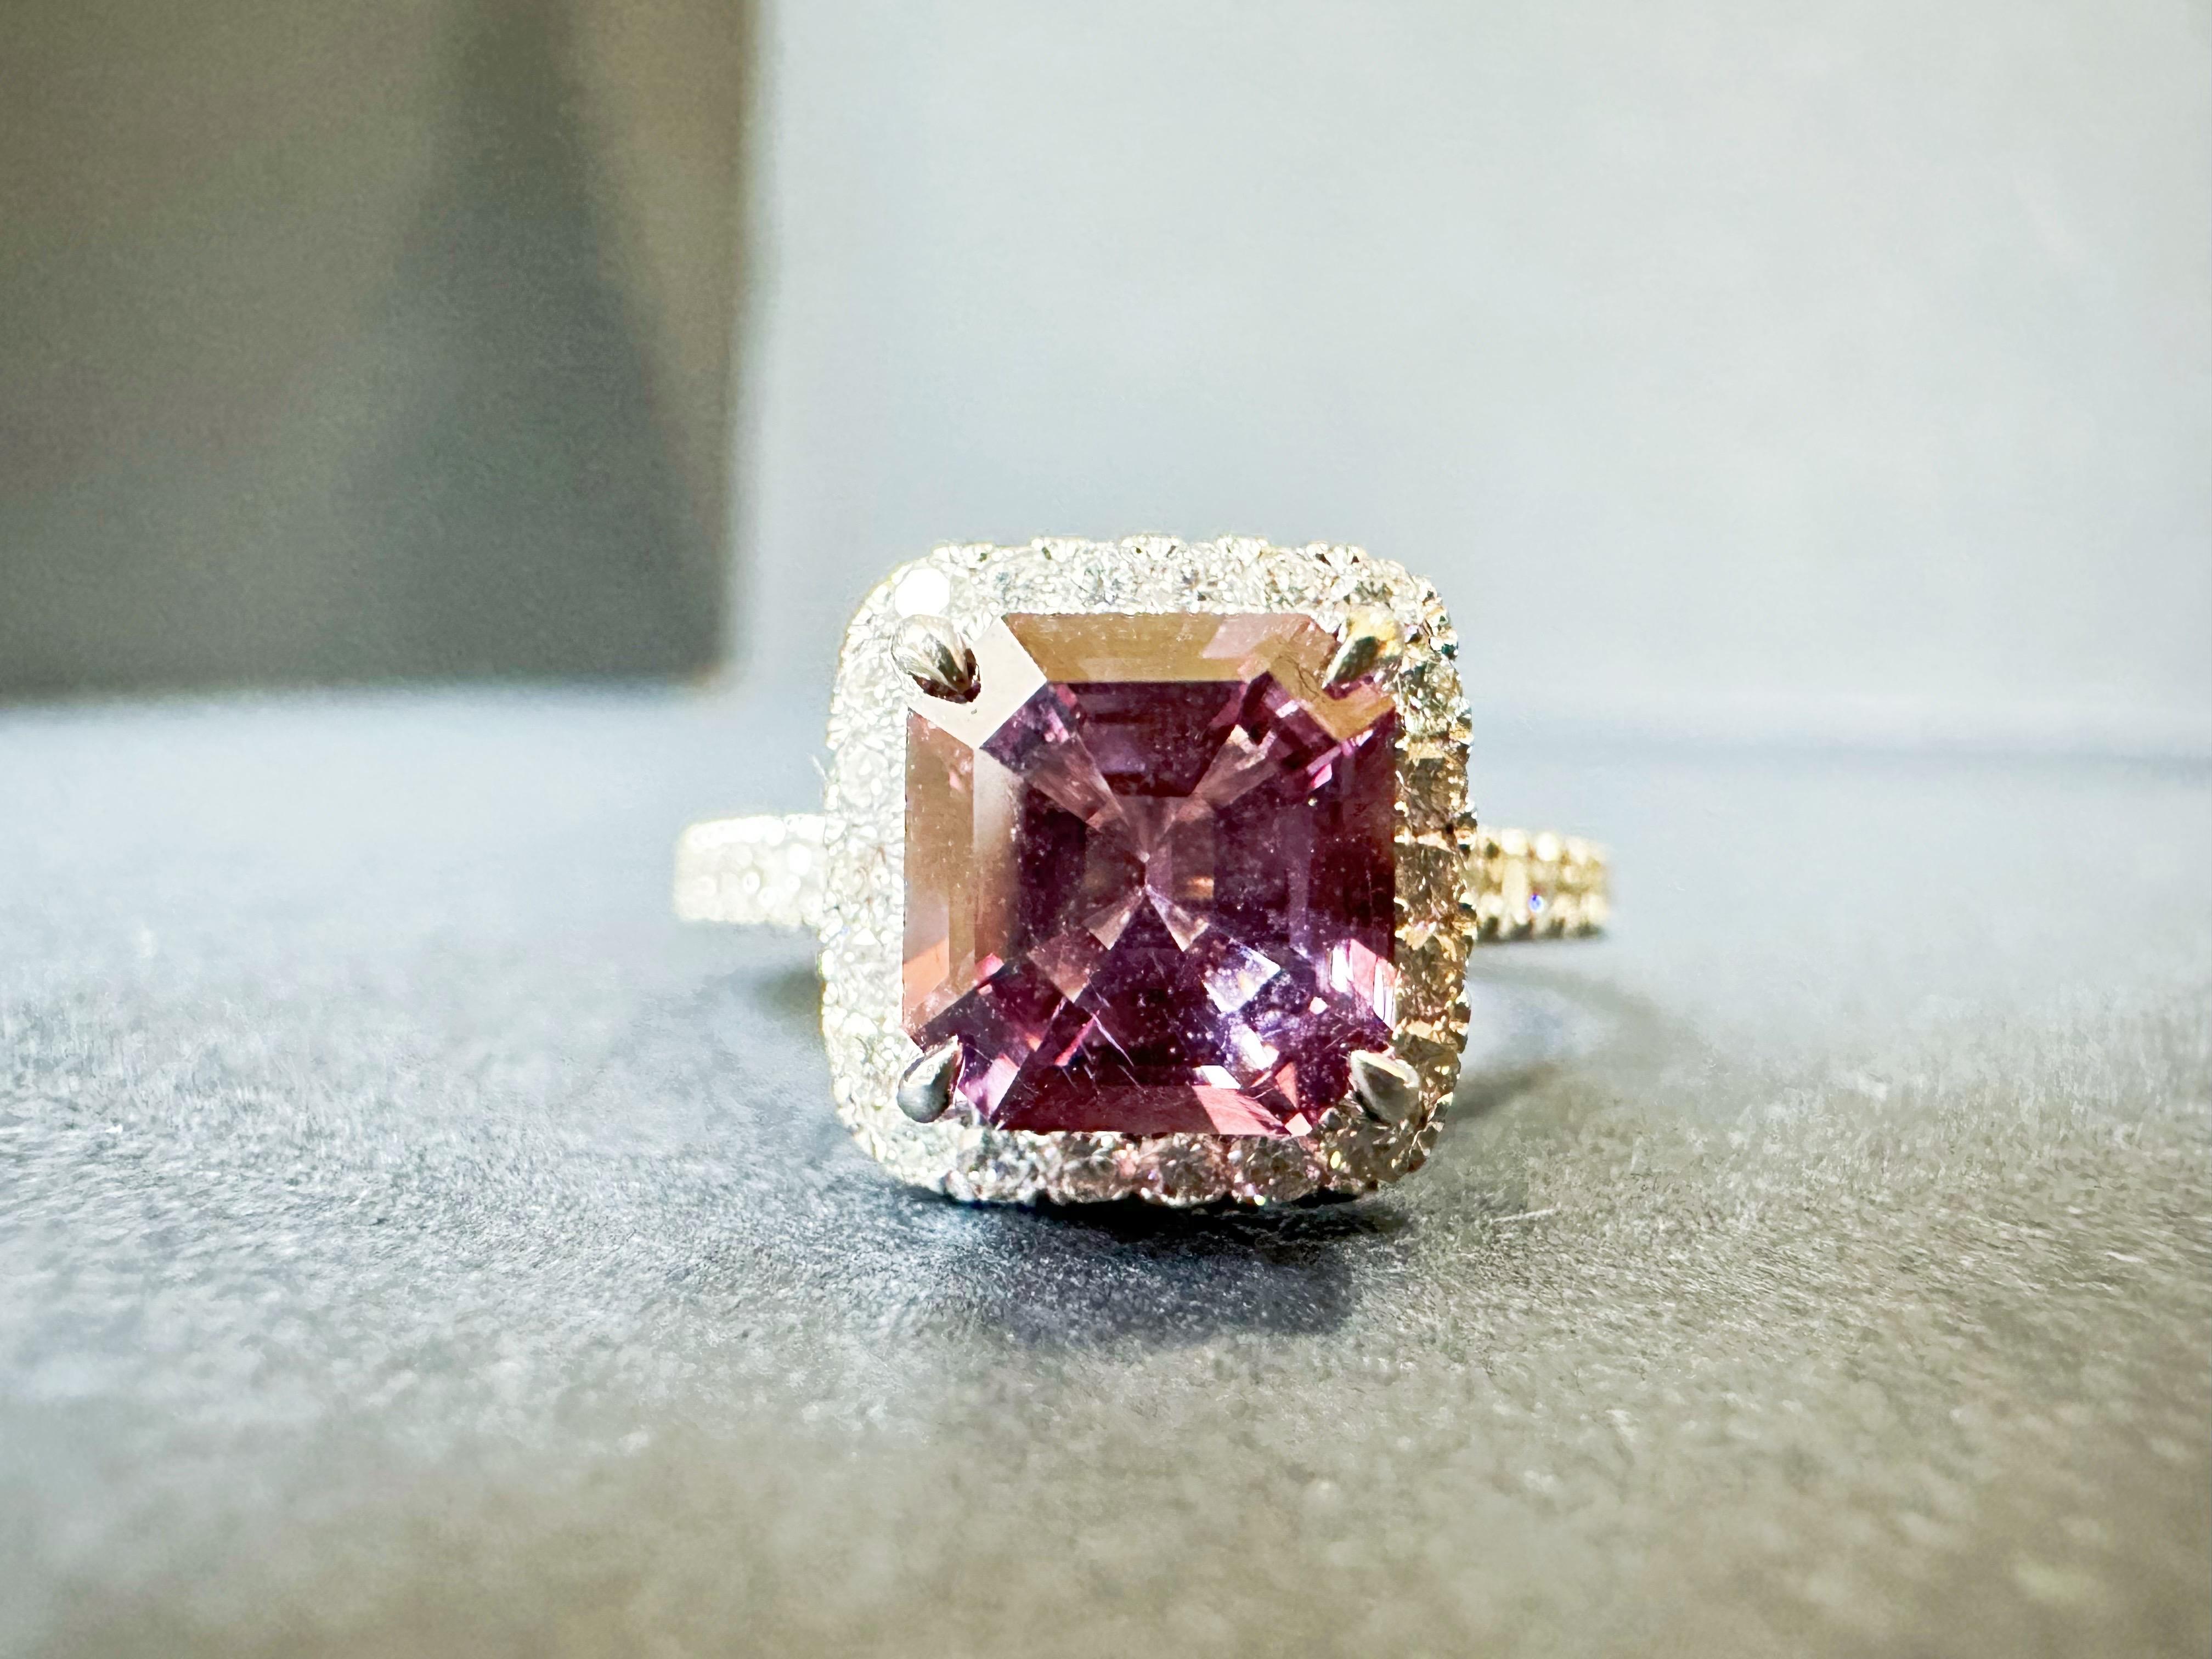 This stunning beautiful purple lavender loose spinel is handpicked by us, and we handcrafted it into a simple and classic halo ring, which is a must for our jewellery wardrobe. 

◆ GEMSTONE: Natural Spinel & Diamonds
◆ RING SIZE: US6 (we offer free